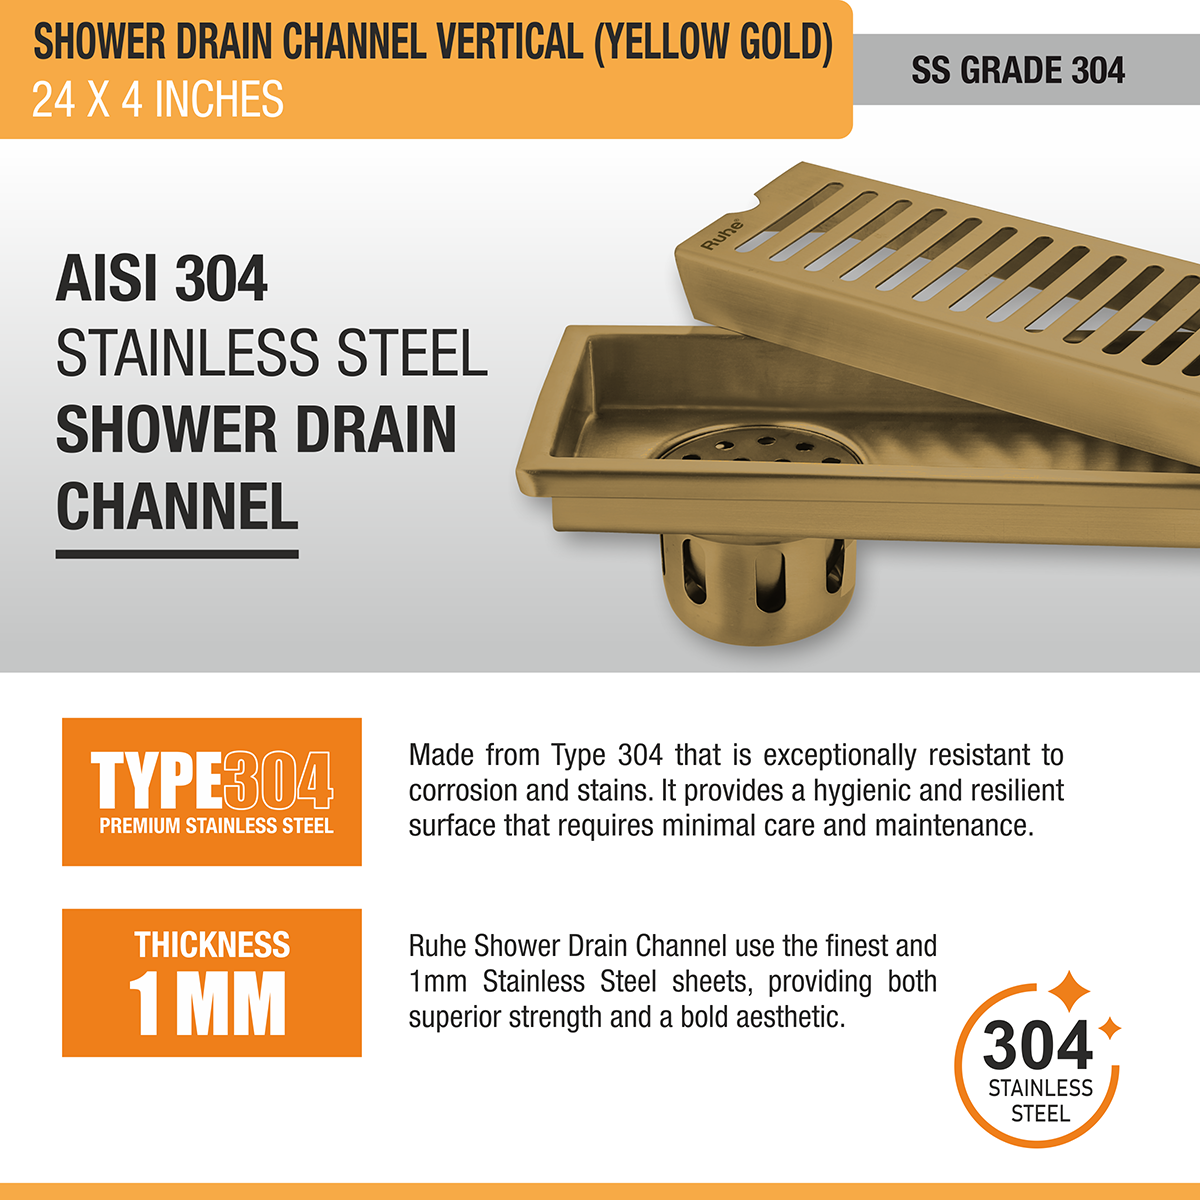 Vertical Shower Drain Channel (24 x 4 Inches) YELLOW GOLD stainless steel